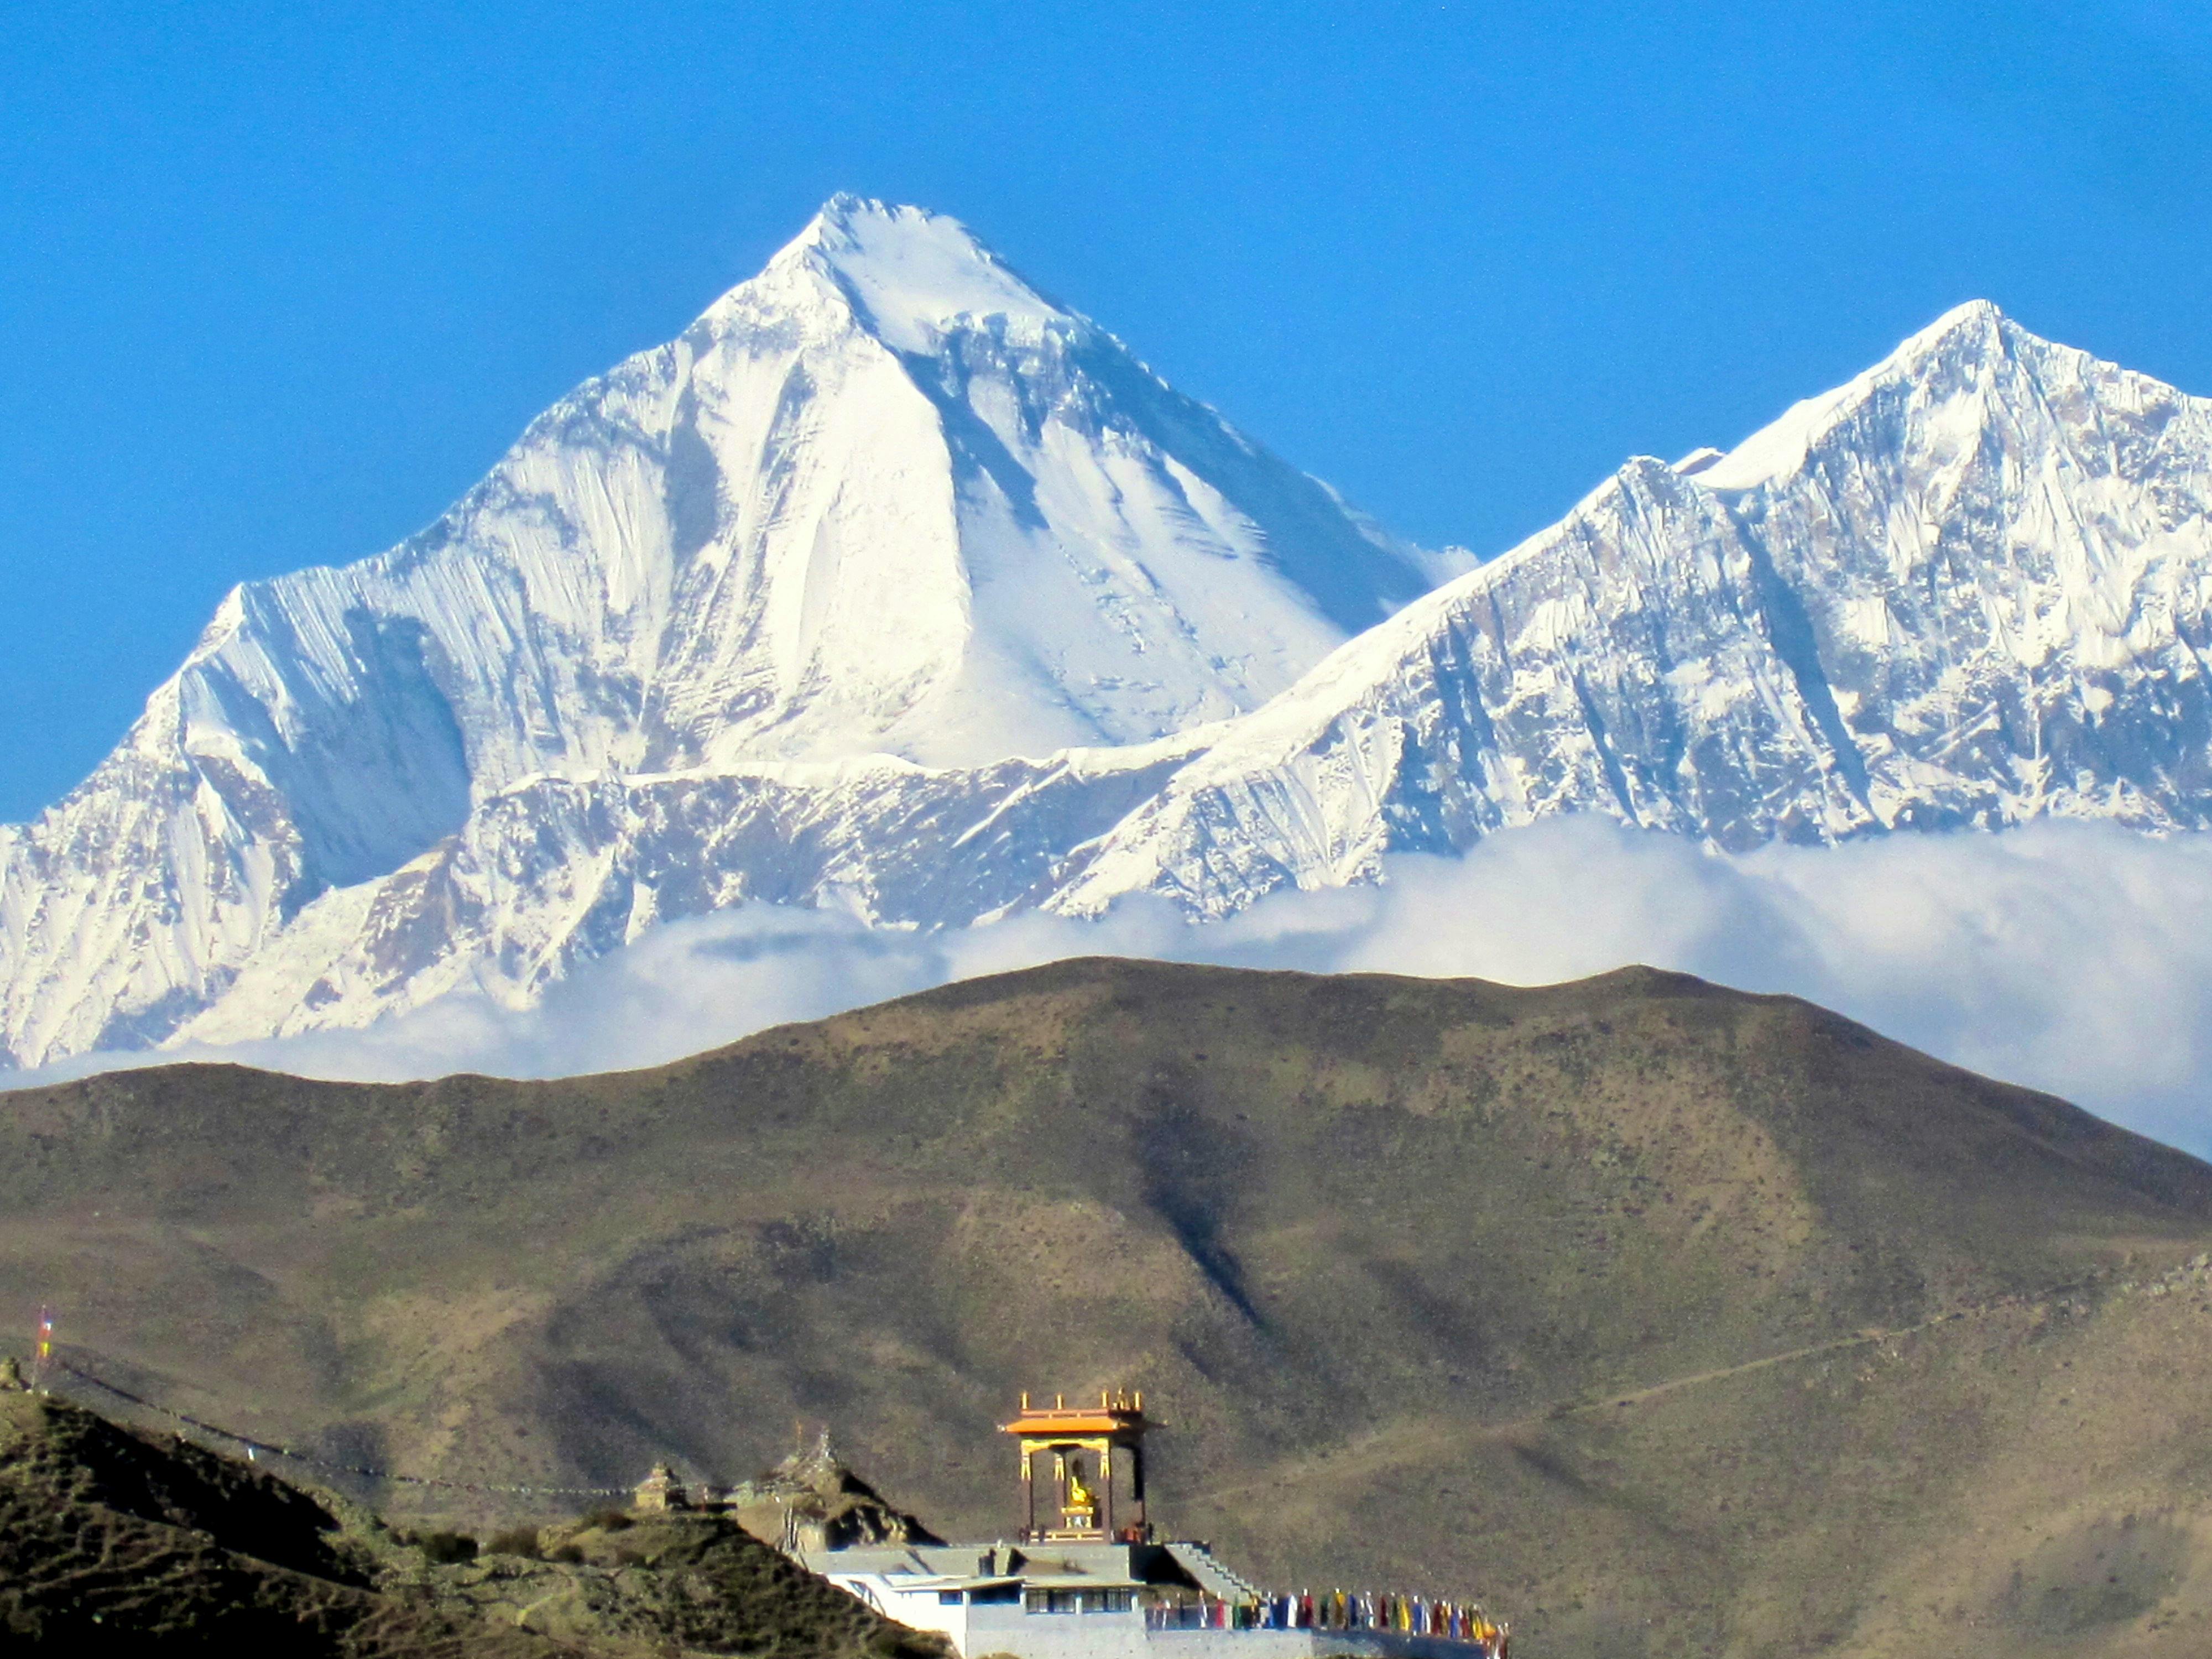 Dhaulagiri mountain with monastery in the background (wikimedia commons by picasa)